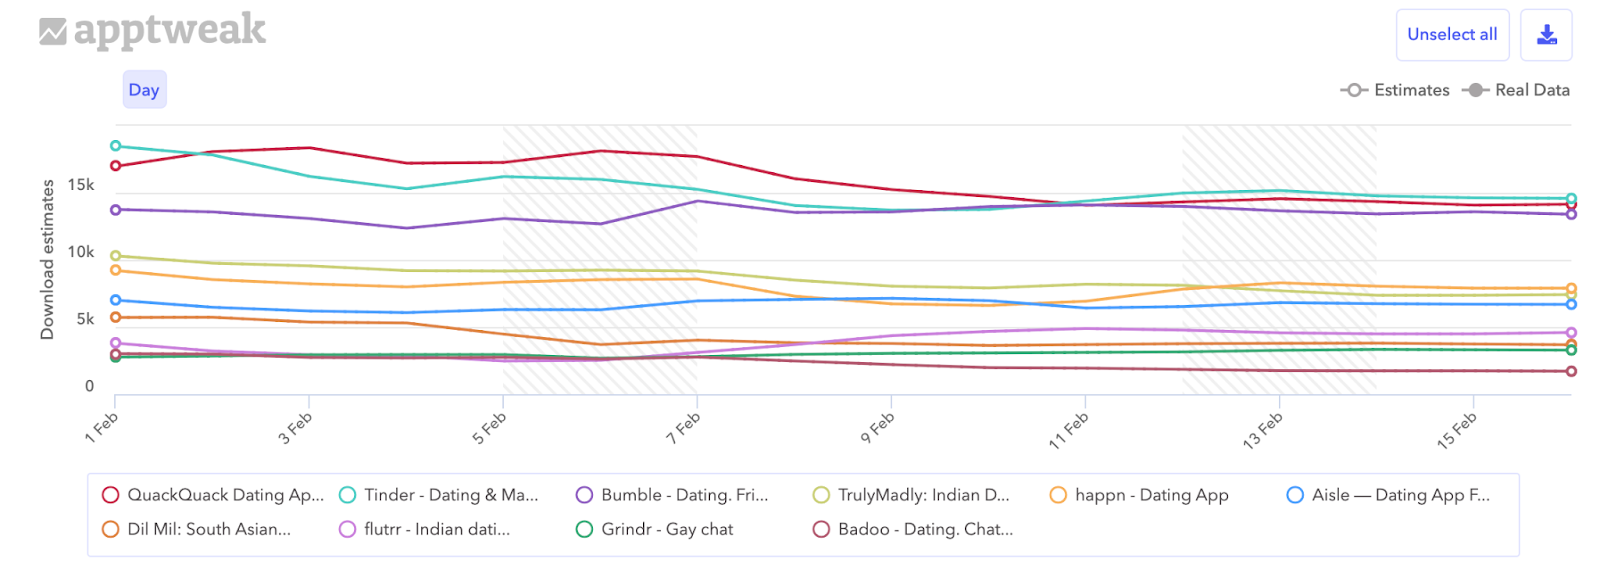 What day is tinder most active?